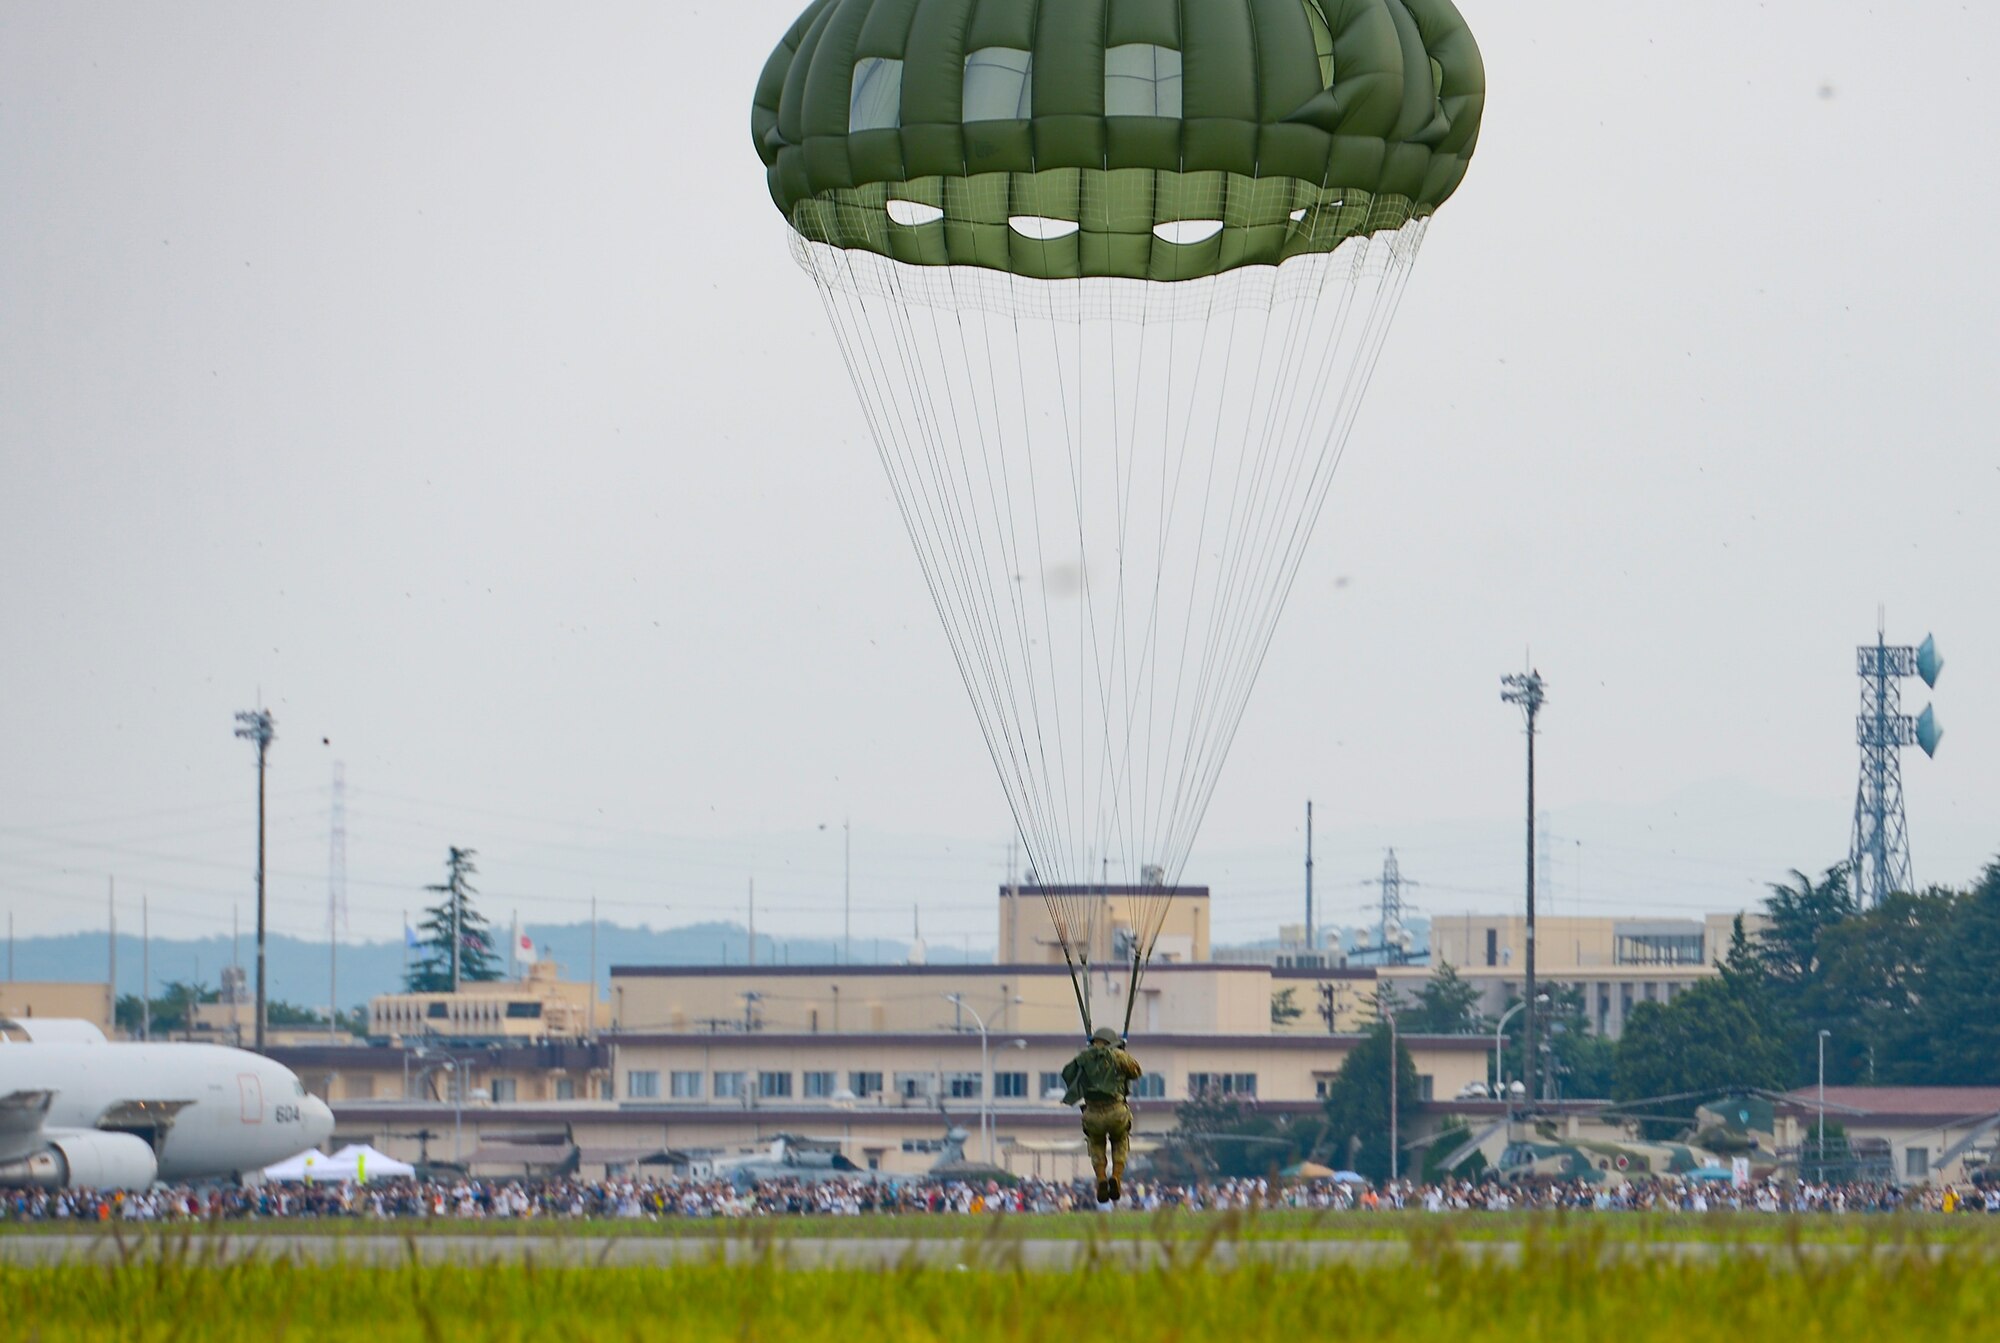 The 36th Airlift Squadron demonstrates a low-cost, low-altitude cargo drop on the air field during the 2016 Japanese-American Friendship Festival at Yokota Air Base, Japan, Sept. 17, 2016. The festival hosted food vendors, static aircraft displays, live entertainment and military and government demonstrations.  (U.S. Air Force photo by Airman 1st Class Elizabeth Baker/Released)